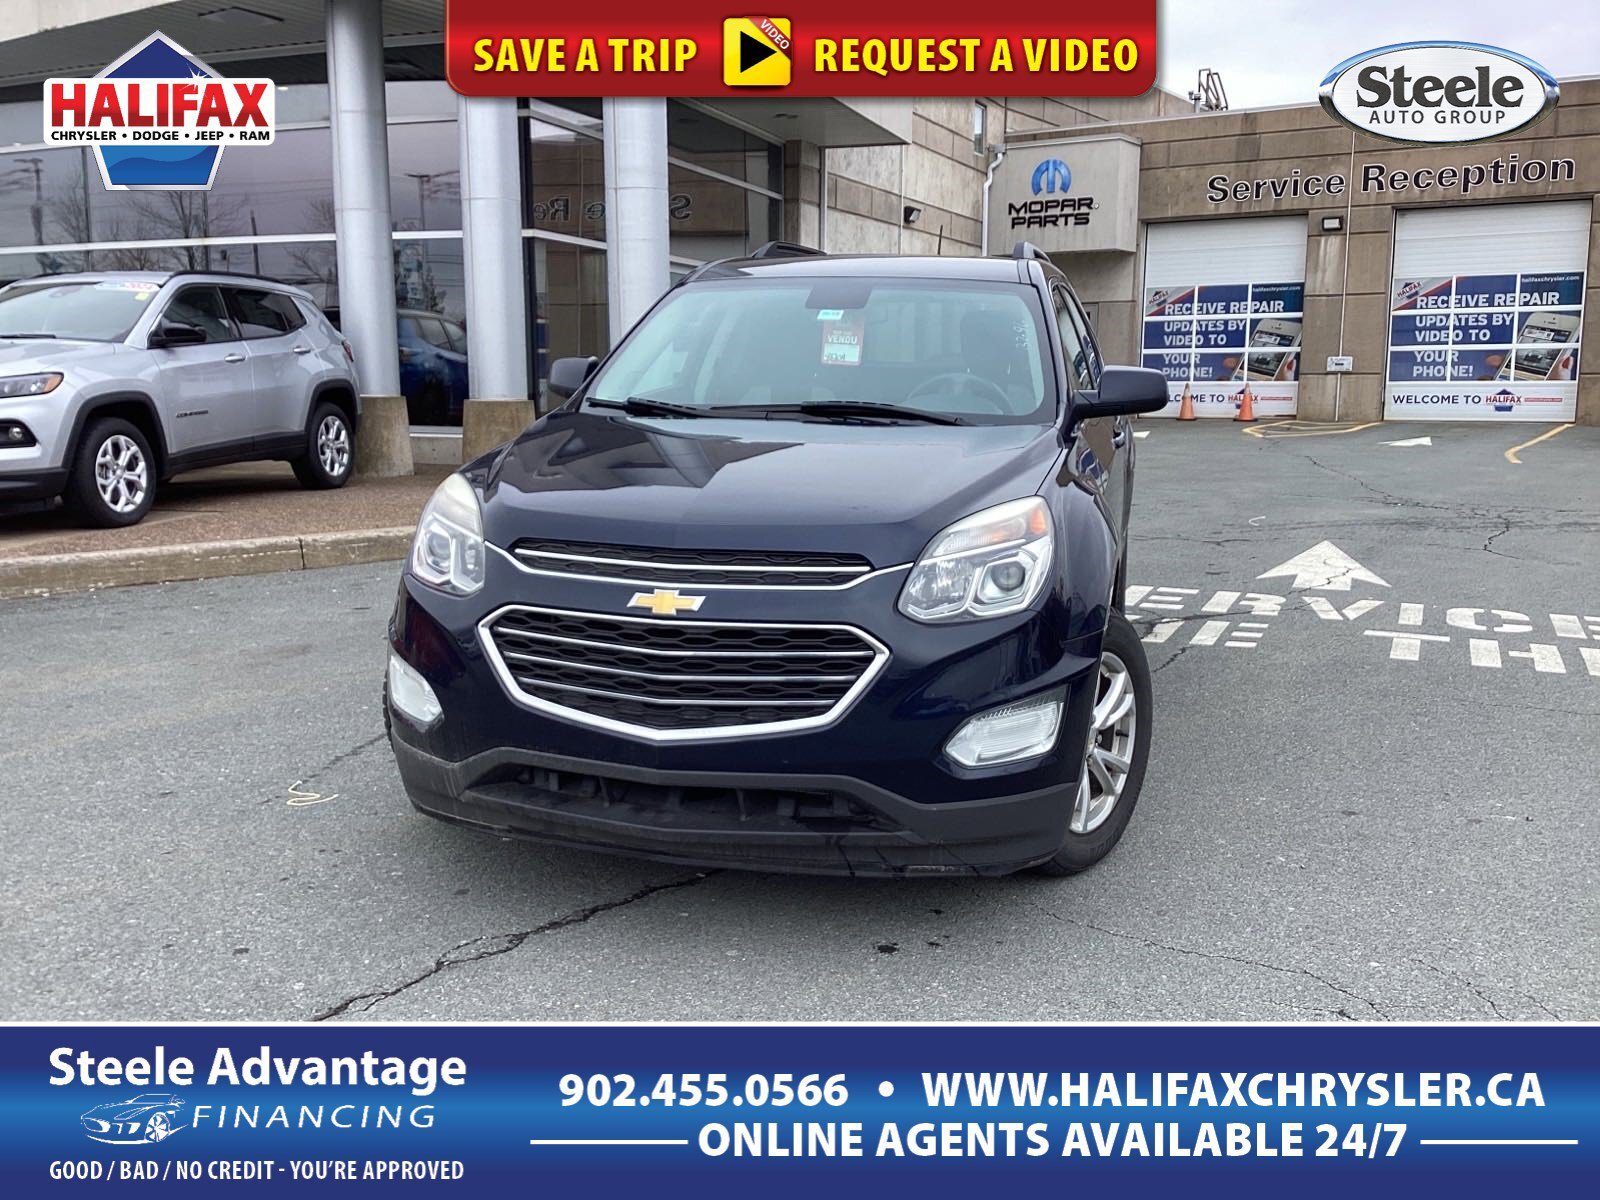 2017 Chevrolet Equinox LT - AFFORDABLE, SPACIOUS, POWER SEAT, NO ACCIDENT